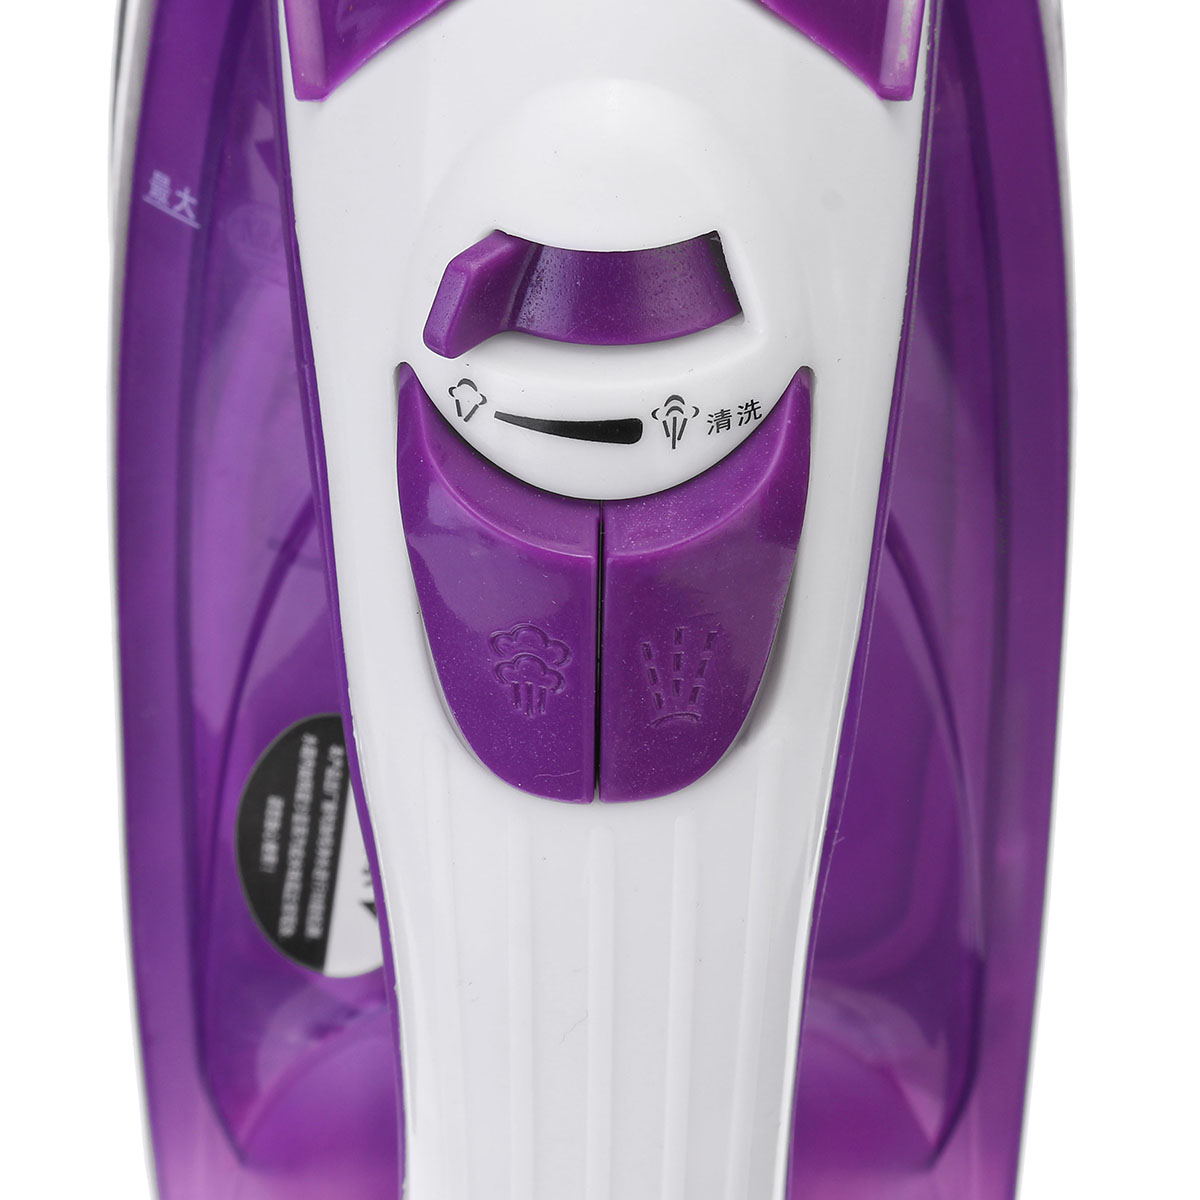 1600W-220V-Handheld-Portable-Steam-Iron-Electric-Garment-Cleaner-5-speed-Temperature-Adjustment-1744438-9